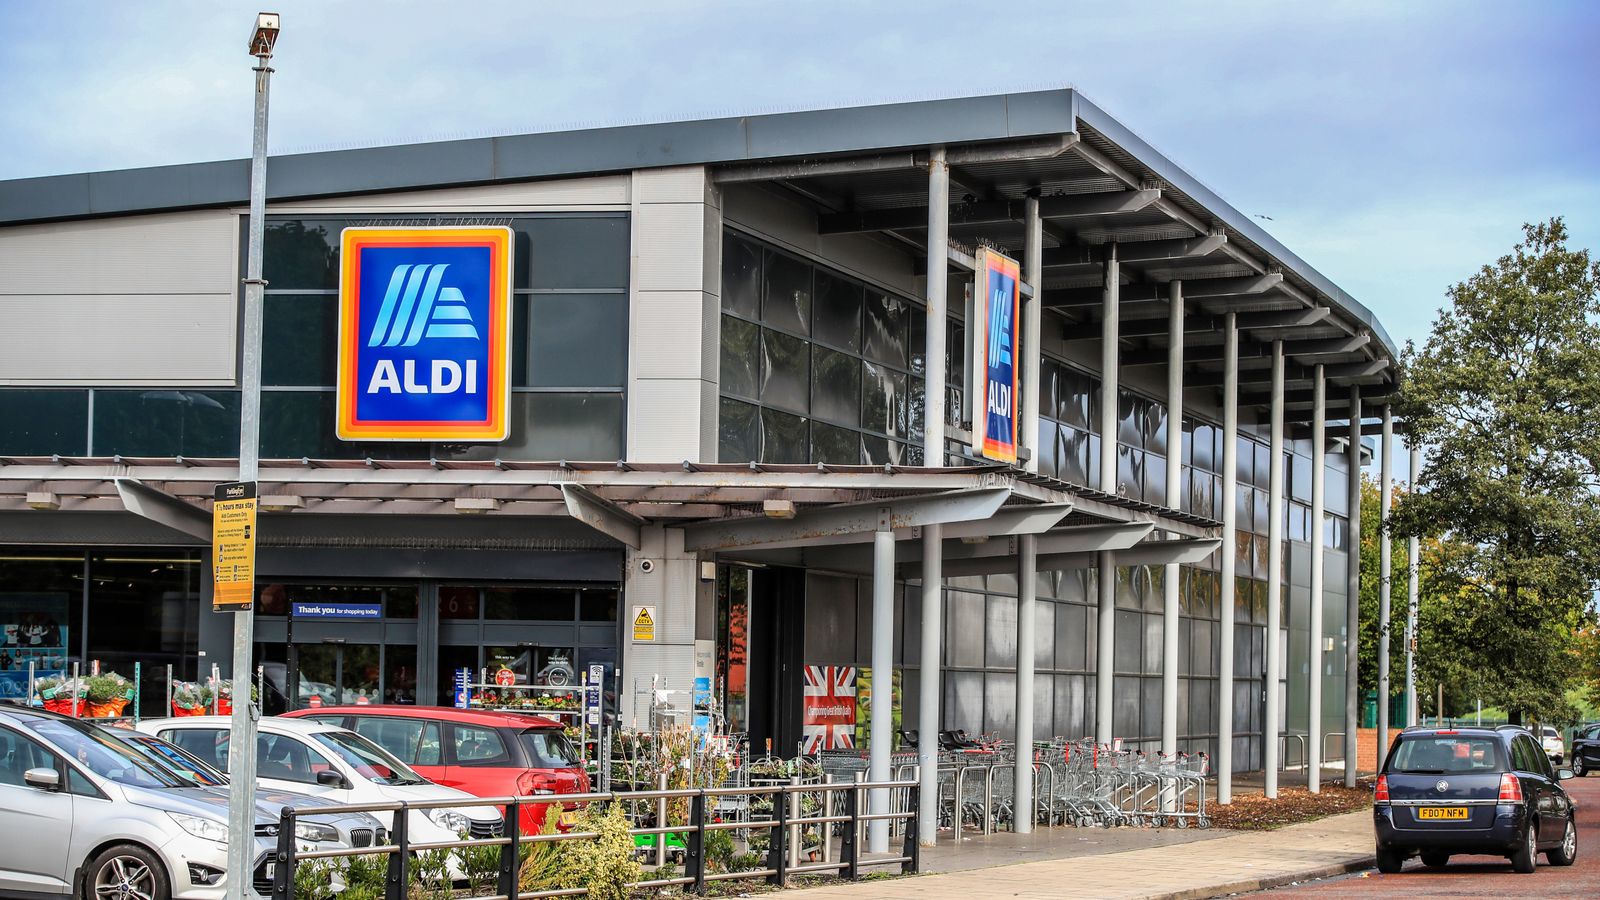 Aldi's 'cheapest Christmas dinner' advert misled shoppers, says watchdog